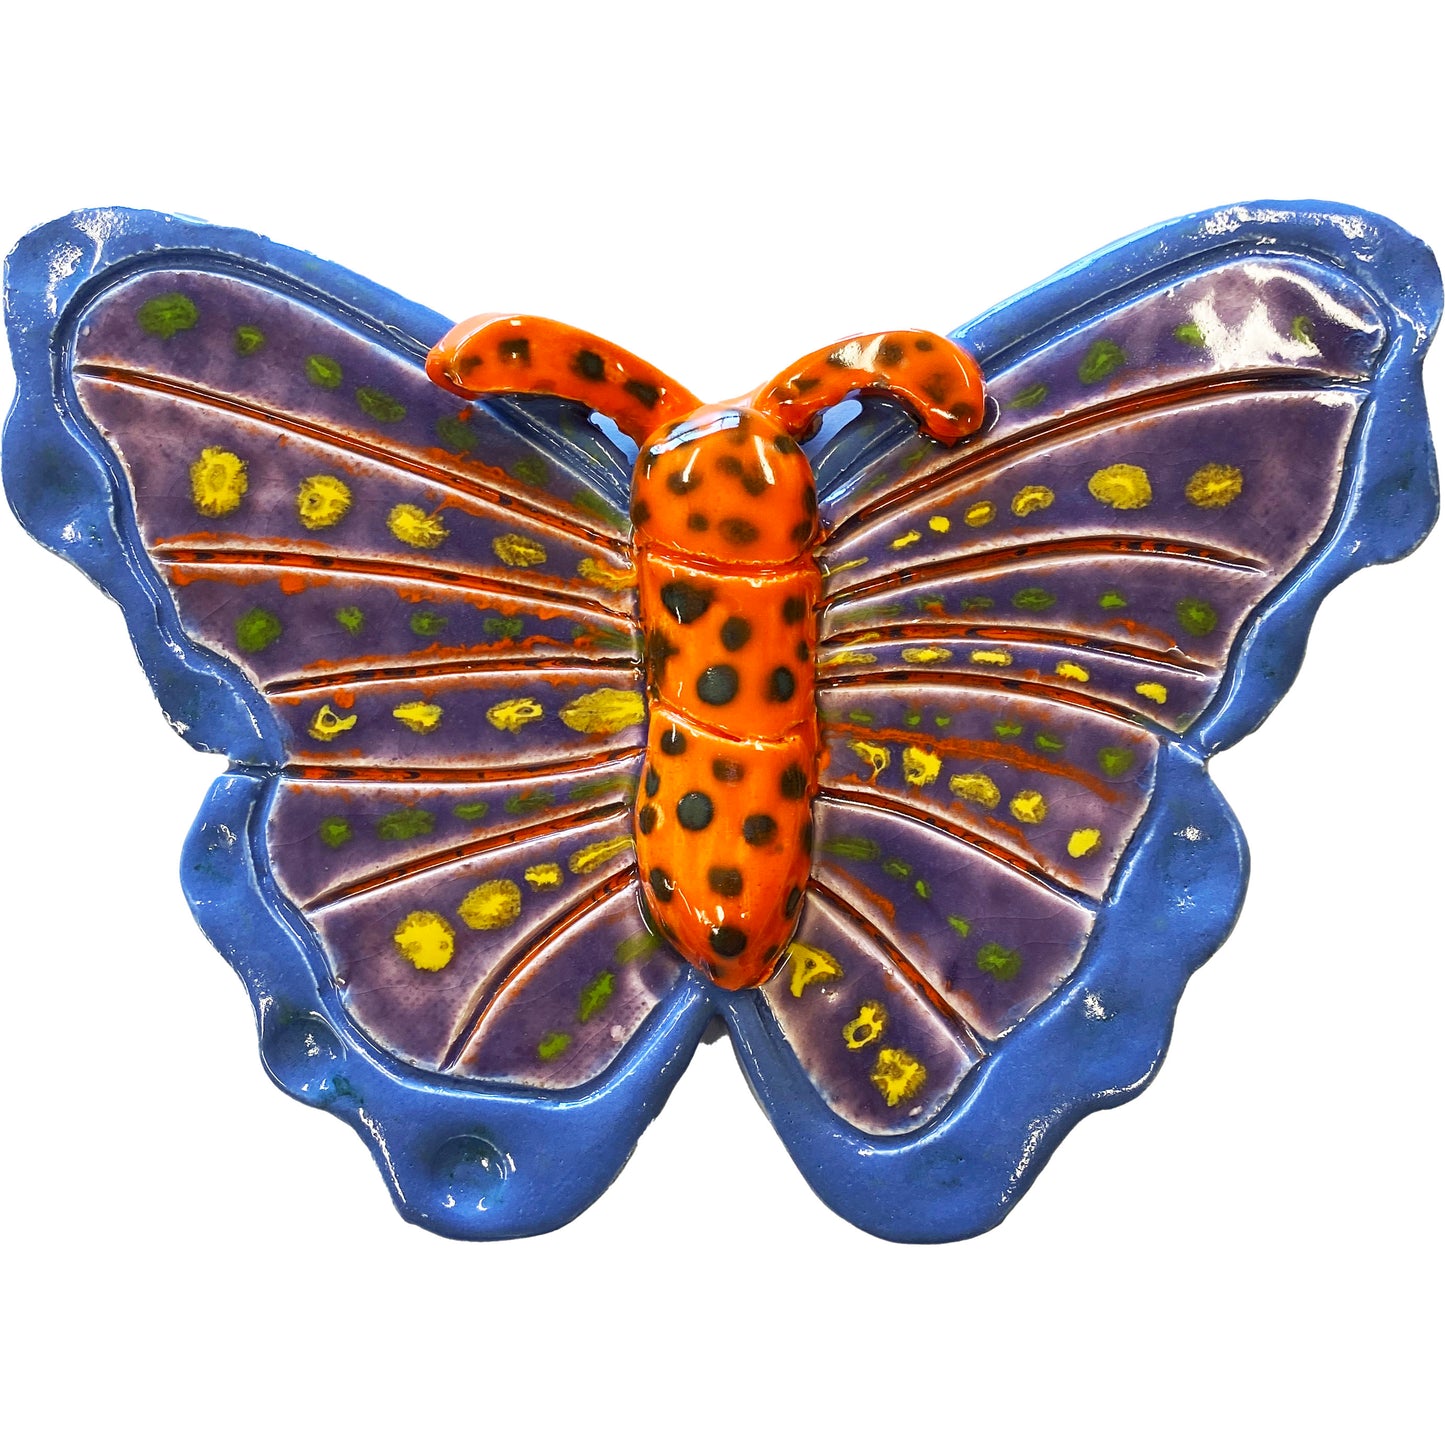 Ceramic Arts Handmade Clay Crafts 8.5-inch x 6-inch Glazed Butterfly made by Lisa Uptain